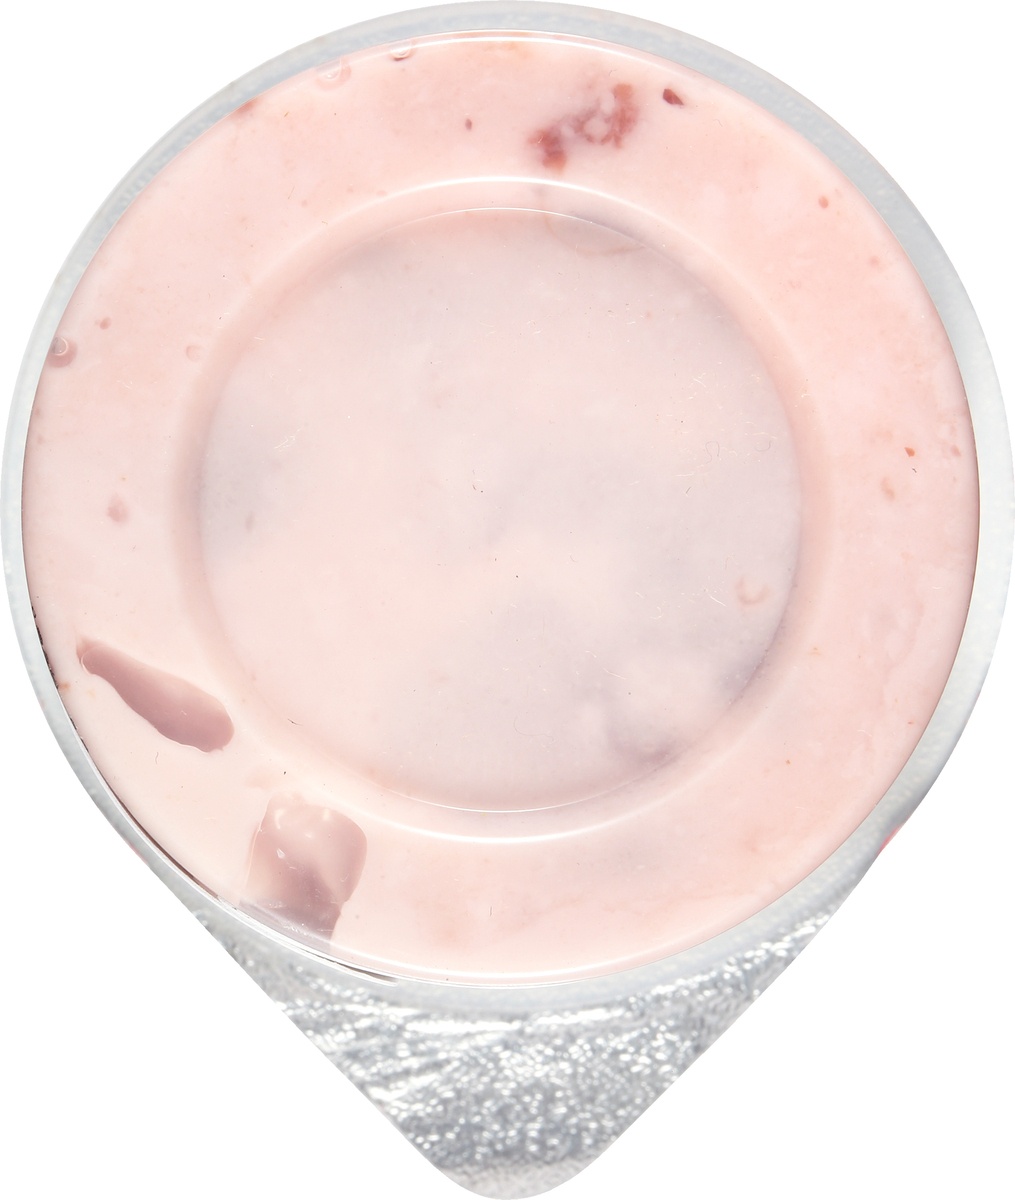 slide 8 of 10, Forager Project Cashewgurt Strawberry Dairy-Free, 5.3 oz